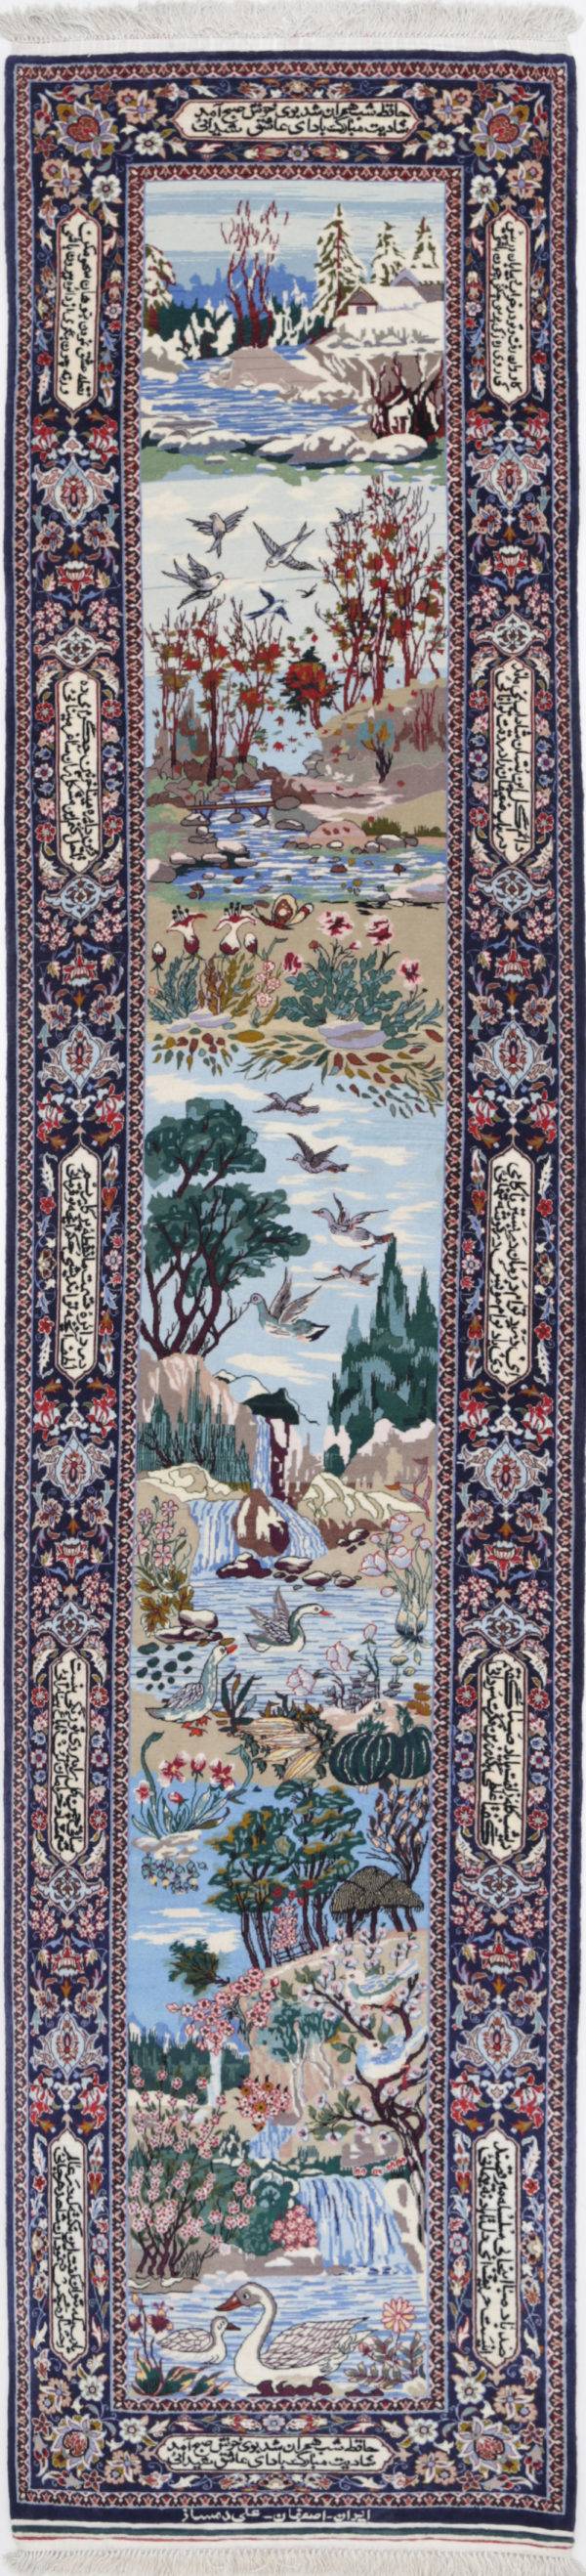 The Tree Of Life, Birds, Prayer Arches, And Vases Are Often Featured In Isfahan Rugs.